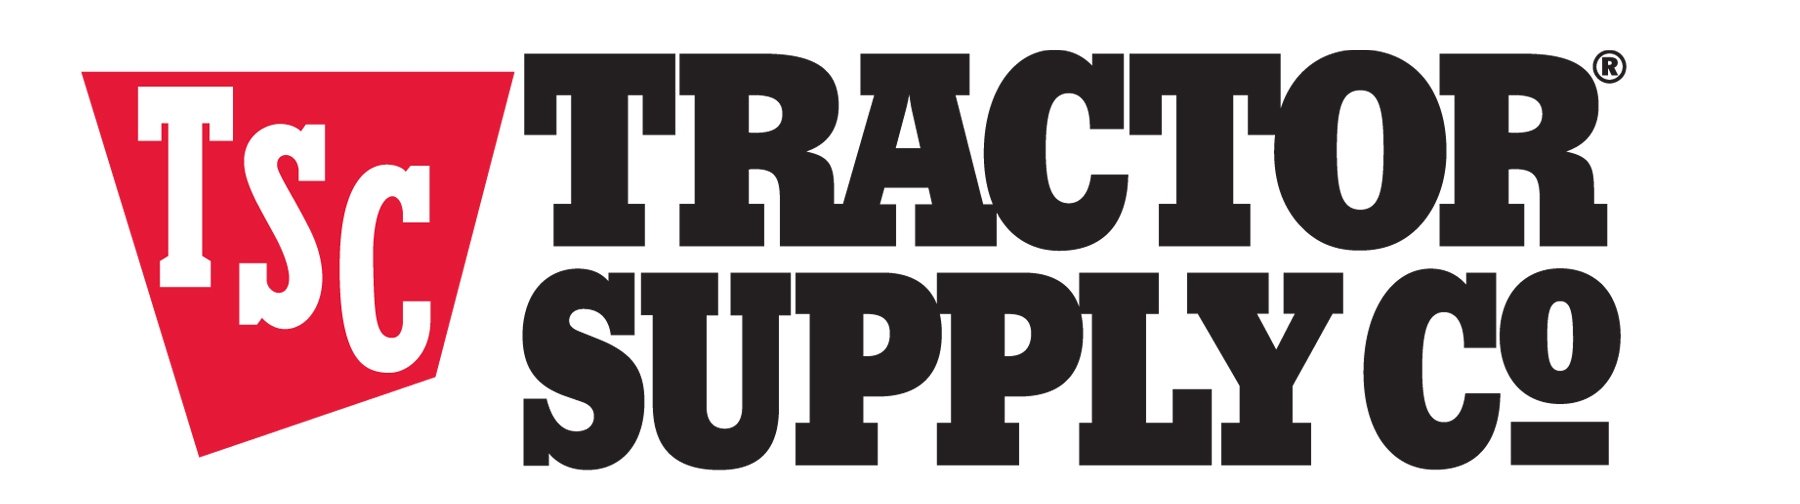 Tractor Supply co logo